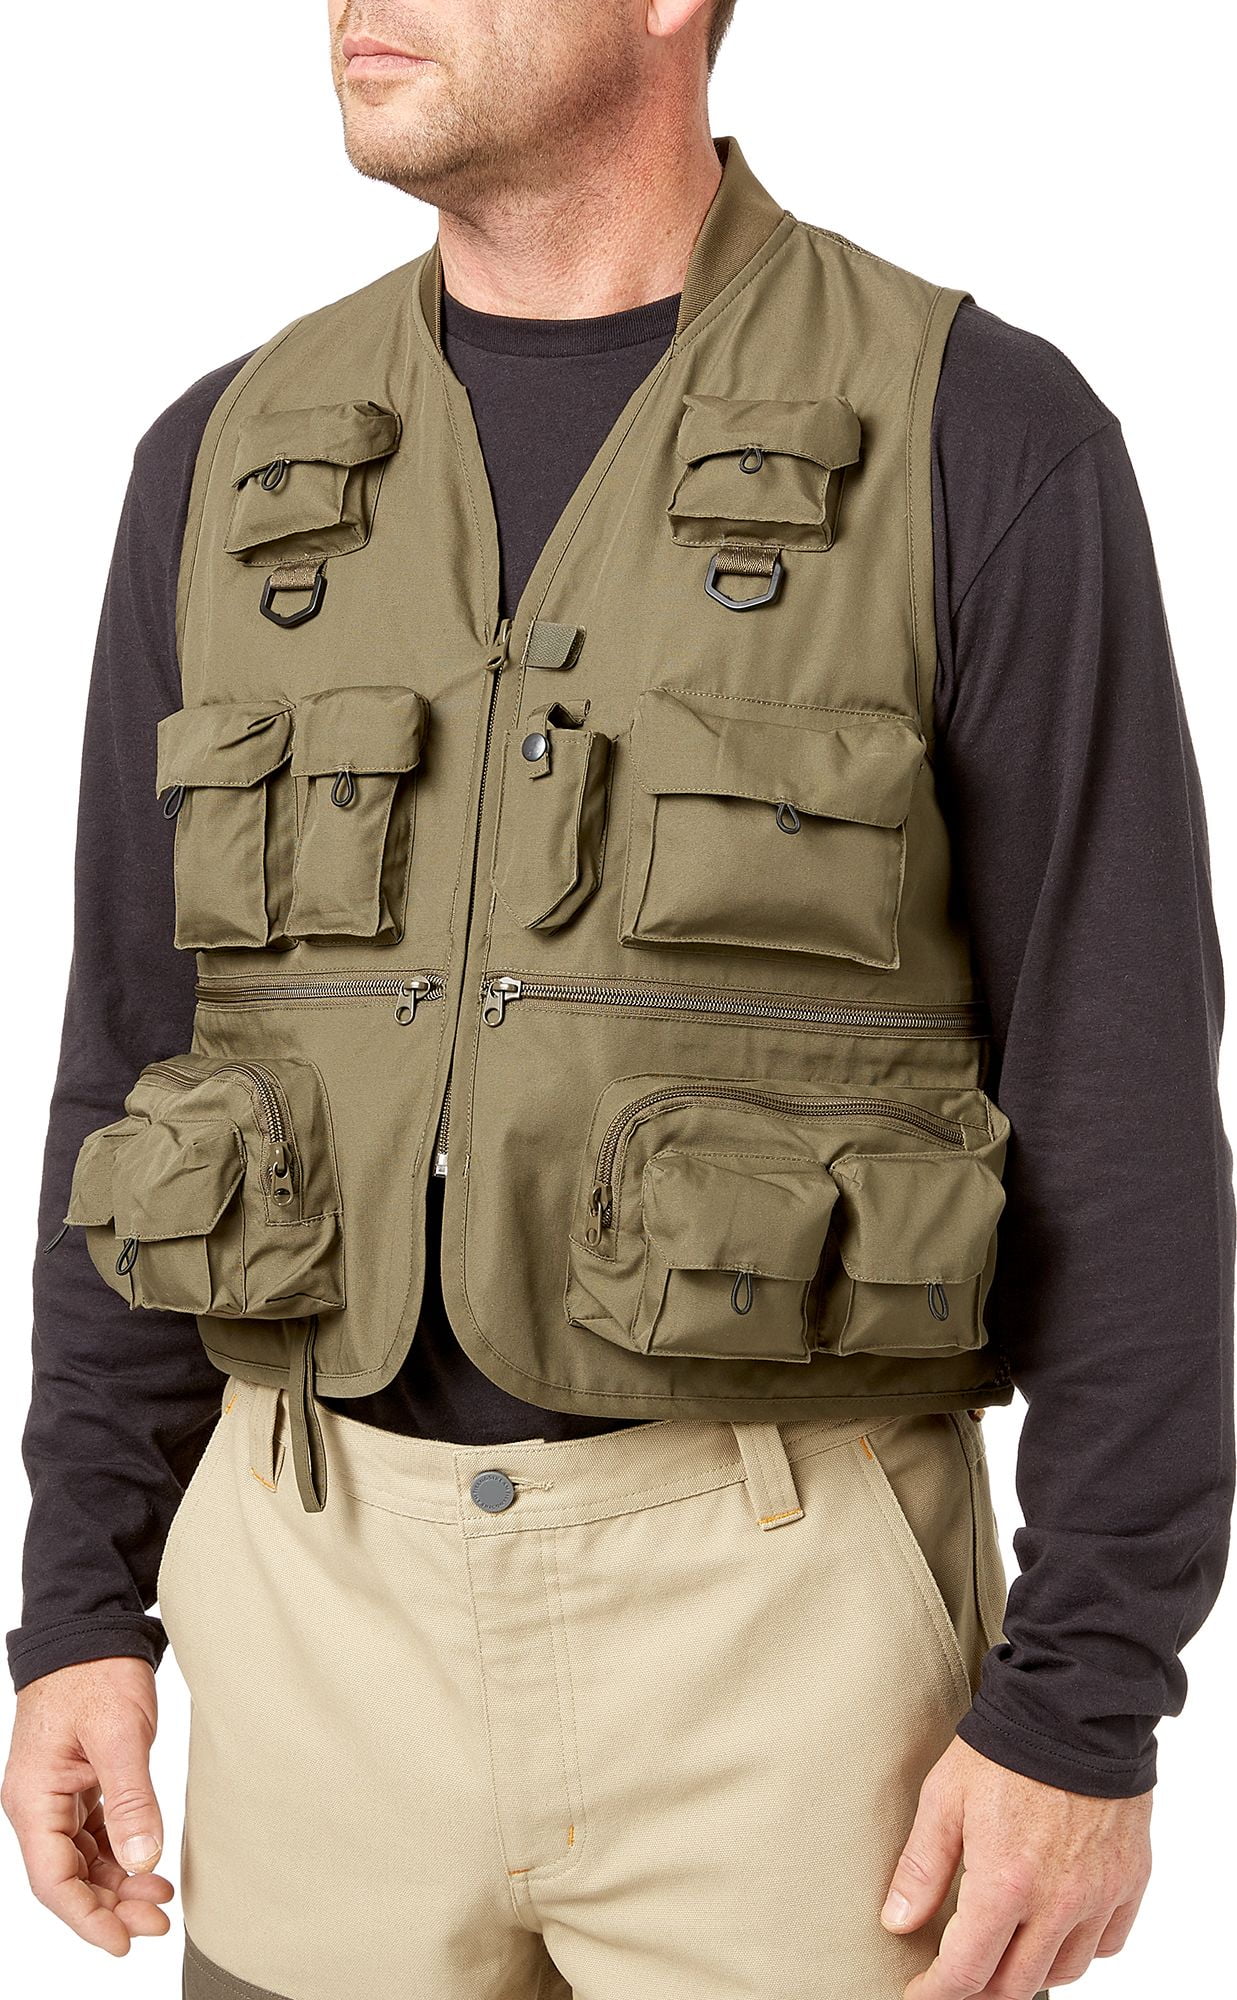 Details about  / Outdoors  Fishing  Vest with Multi Pocket Breathable Mesh Jacket Men and Women